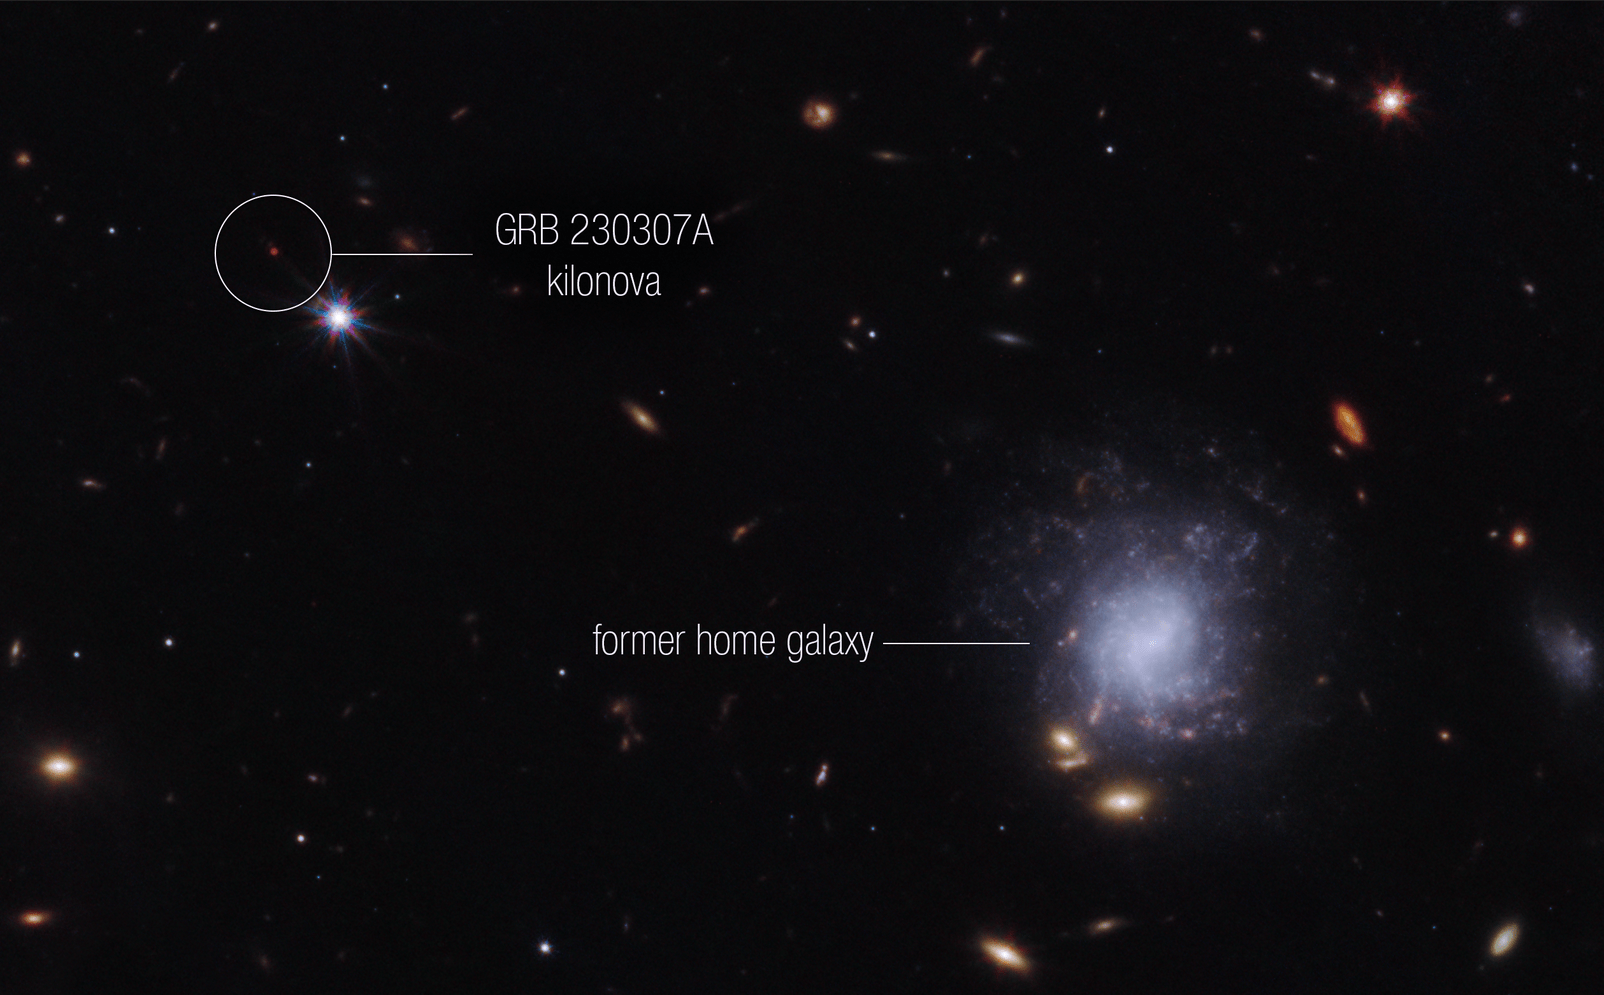 Bright galaxies and other light sources in various sizes and shapes are scattered across a black swath of space: small points, hazy elliptical-like smudges with halos, and spiral-shaped blobs. The objects vary in color: white, blue-white, yellow-white, and orange-red. Toward the center right is a blue-white spiral galaxy seen face-on that is larger than the other light sources in the image. The galaxy is labeled “former home galaxy.” Toward the upper left is a small red point, which has a white circle around it and is labeled “GRB 230307A kilonova.”